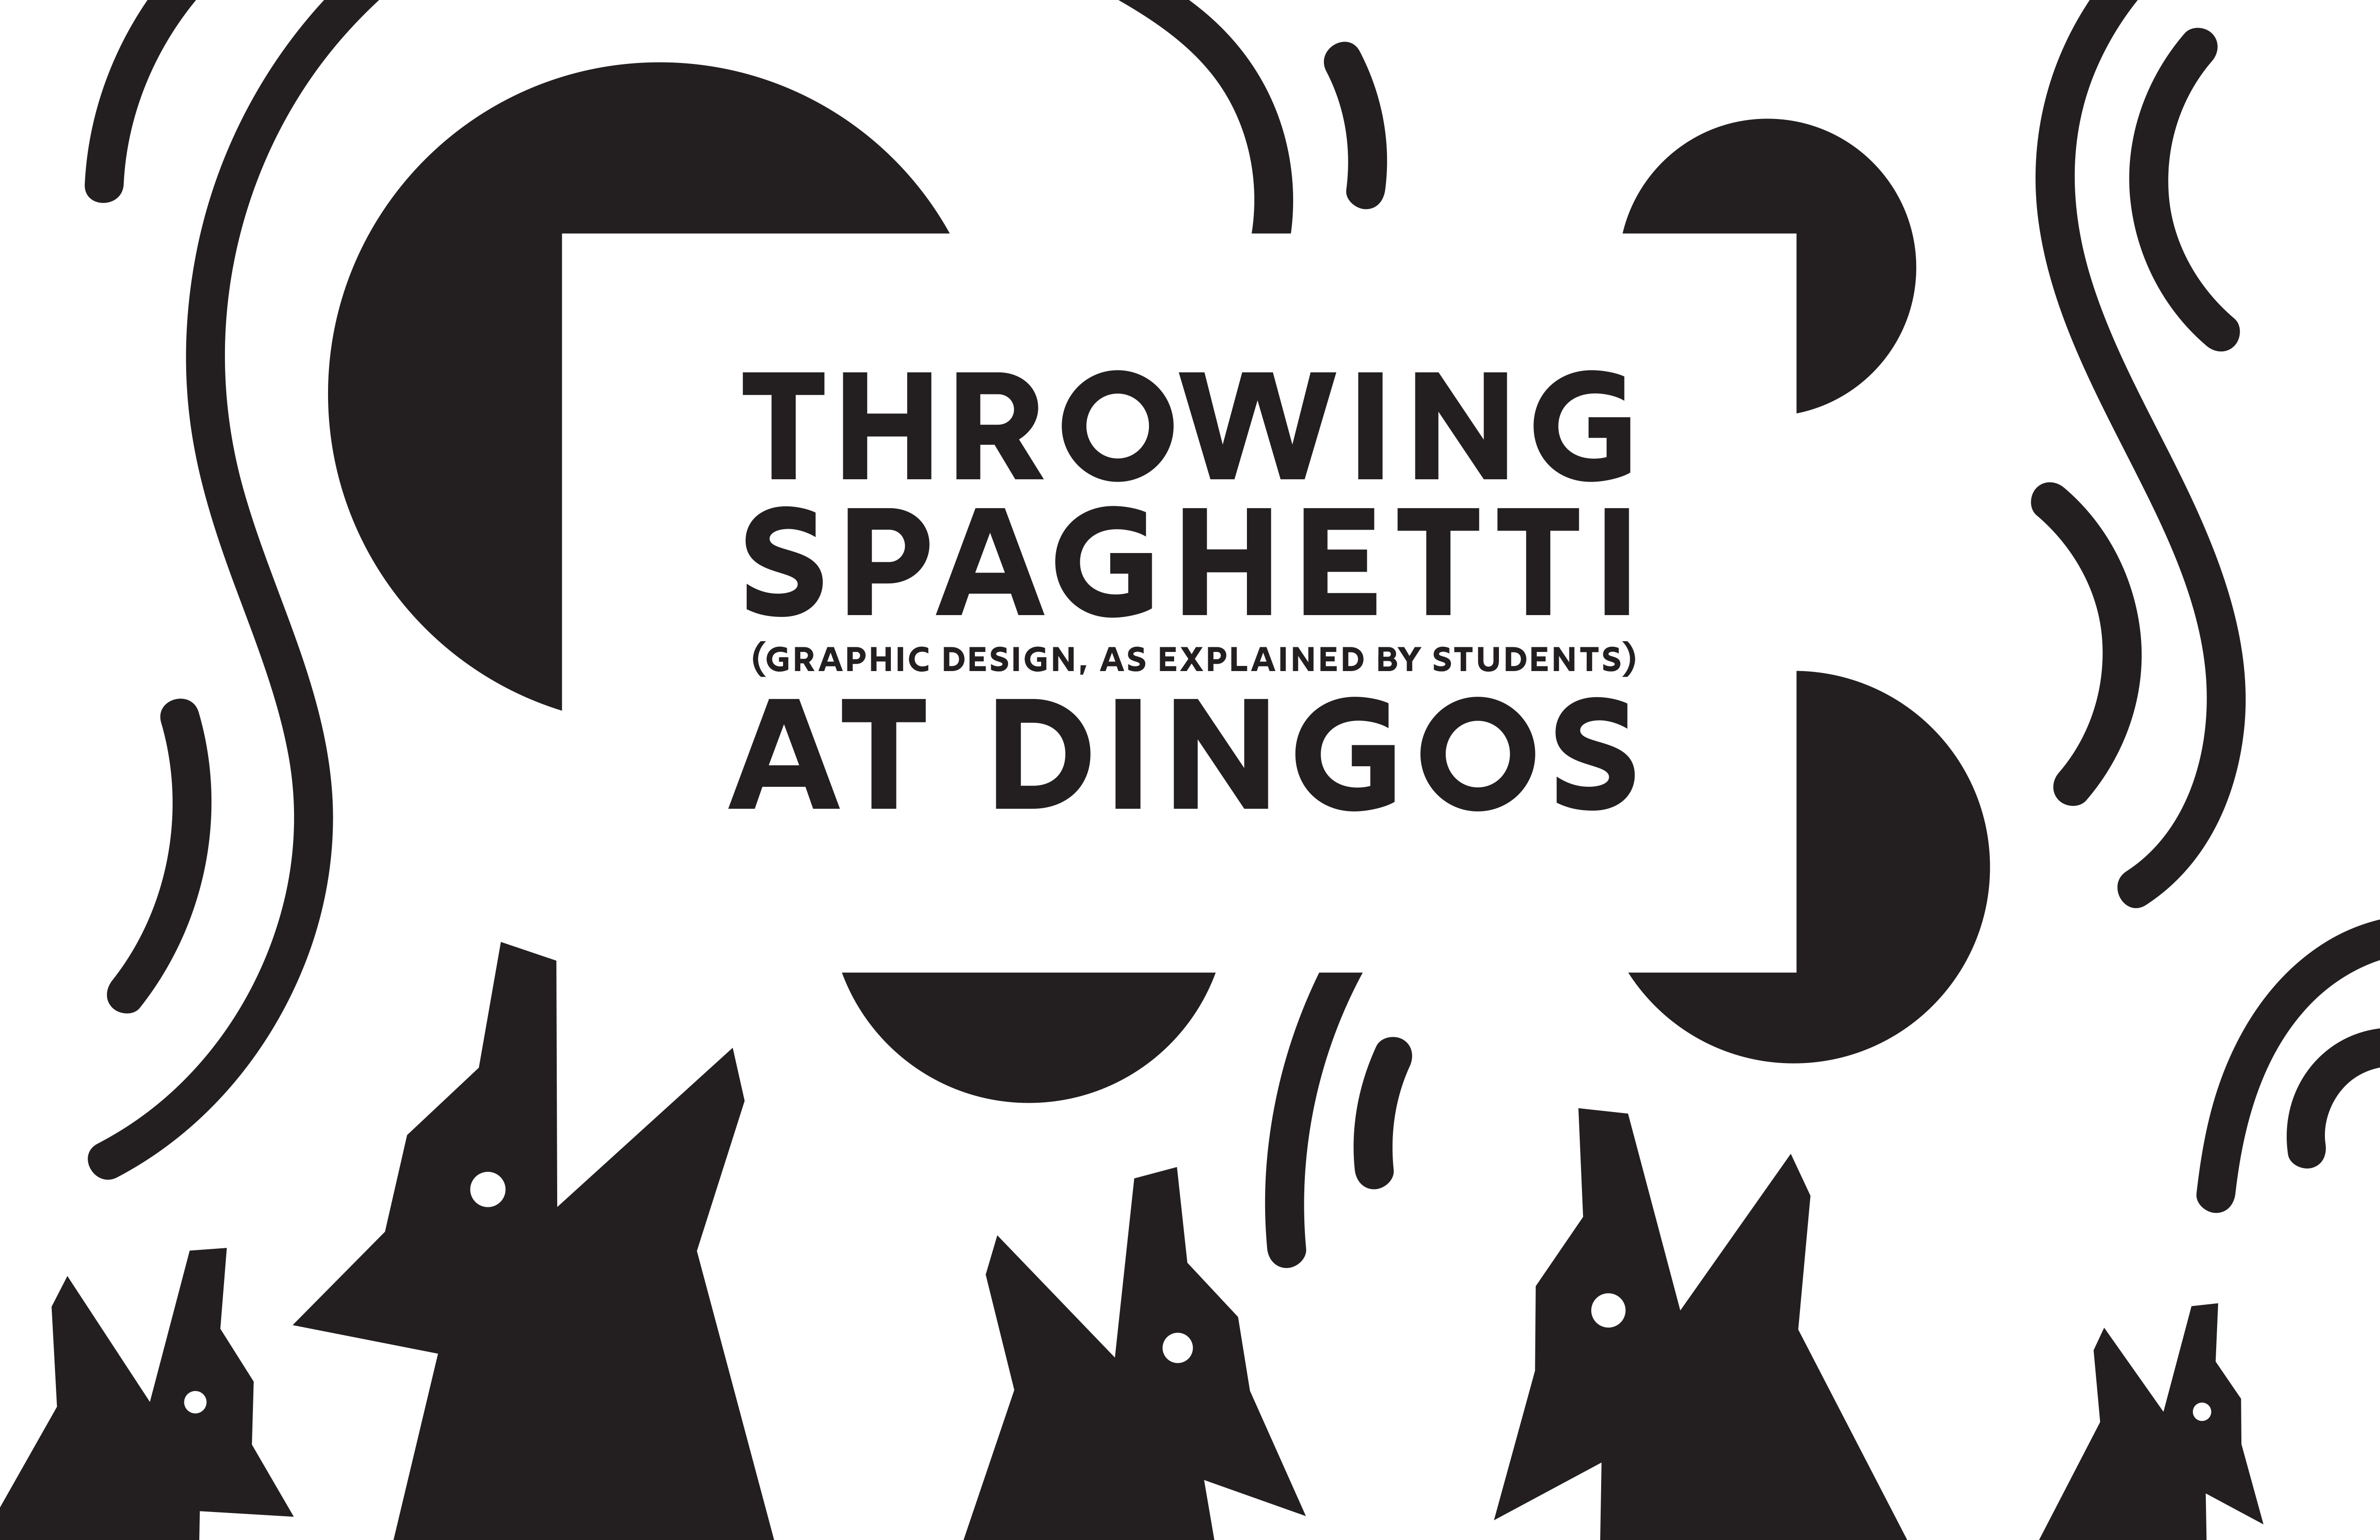 Throwing Spaghetti at Dingos (Graphic design, as explained by students)